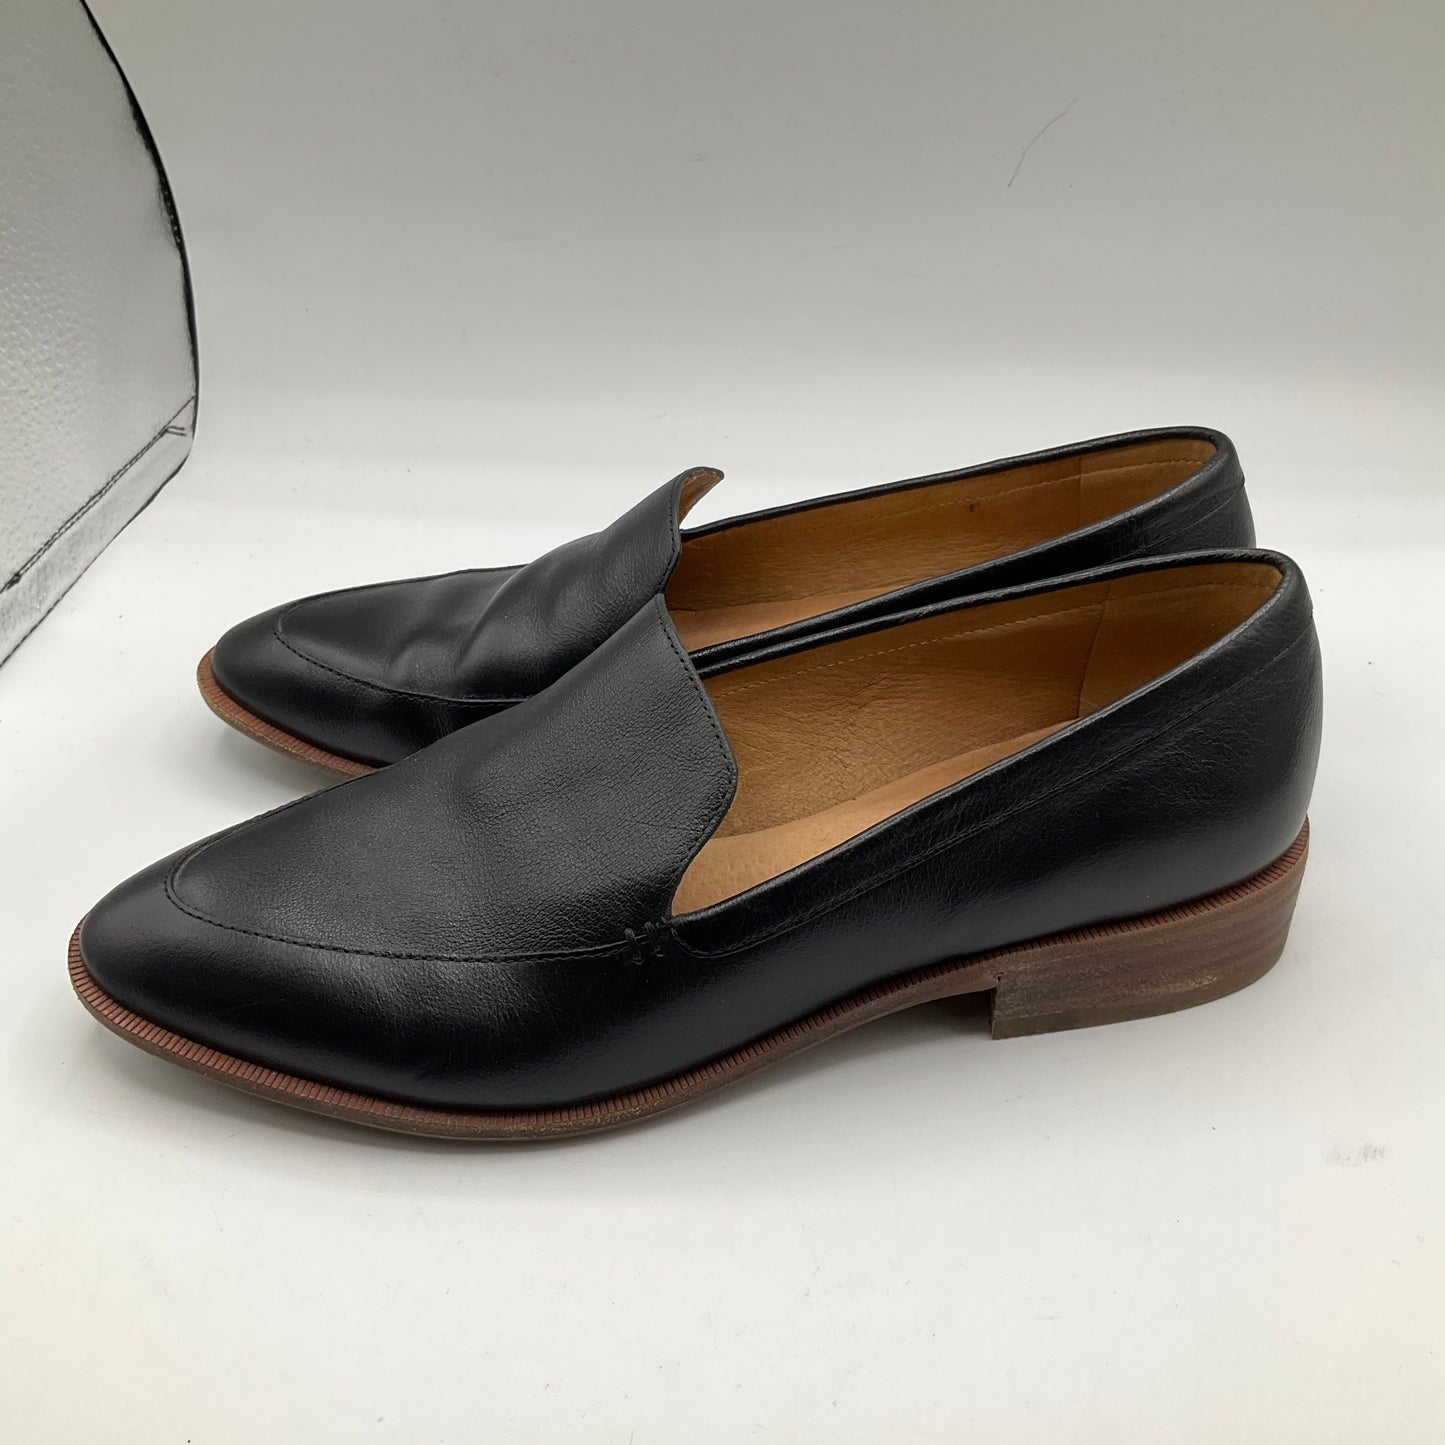 Shoes Flats Loafer Oxford By Madewell  Size: 8.5